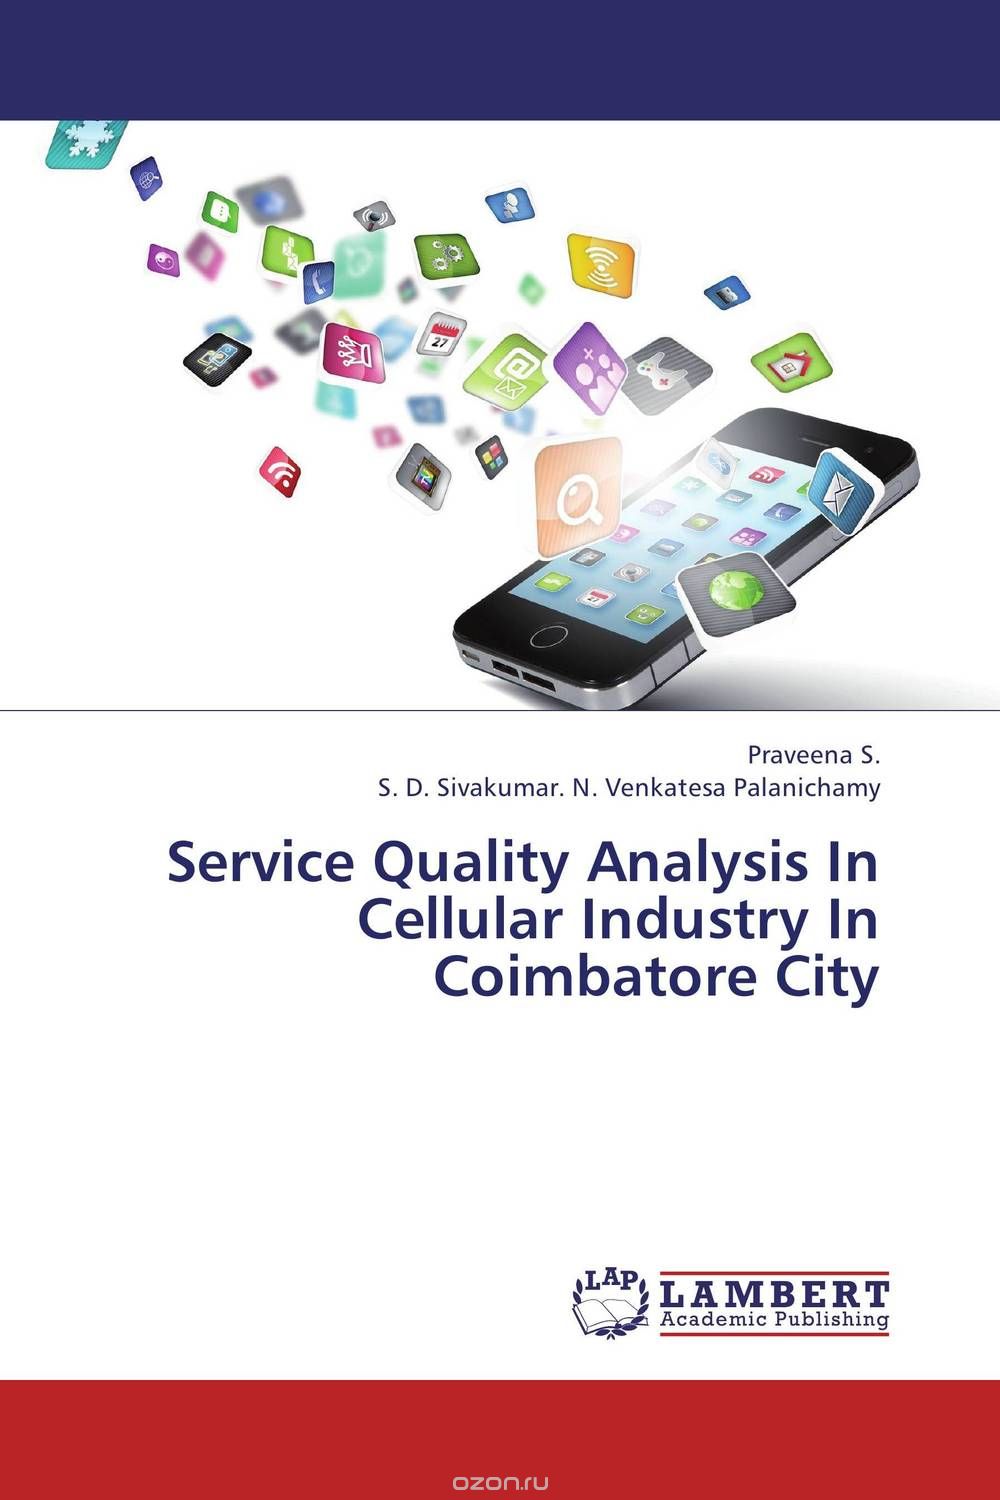 Service Quality Analysis In Cellular Industry In Coimbatore City